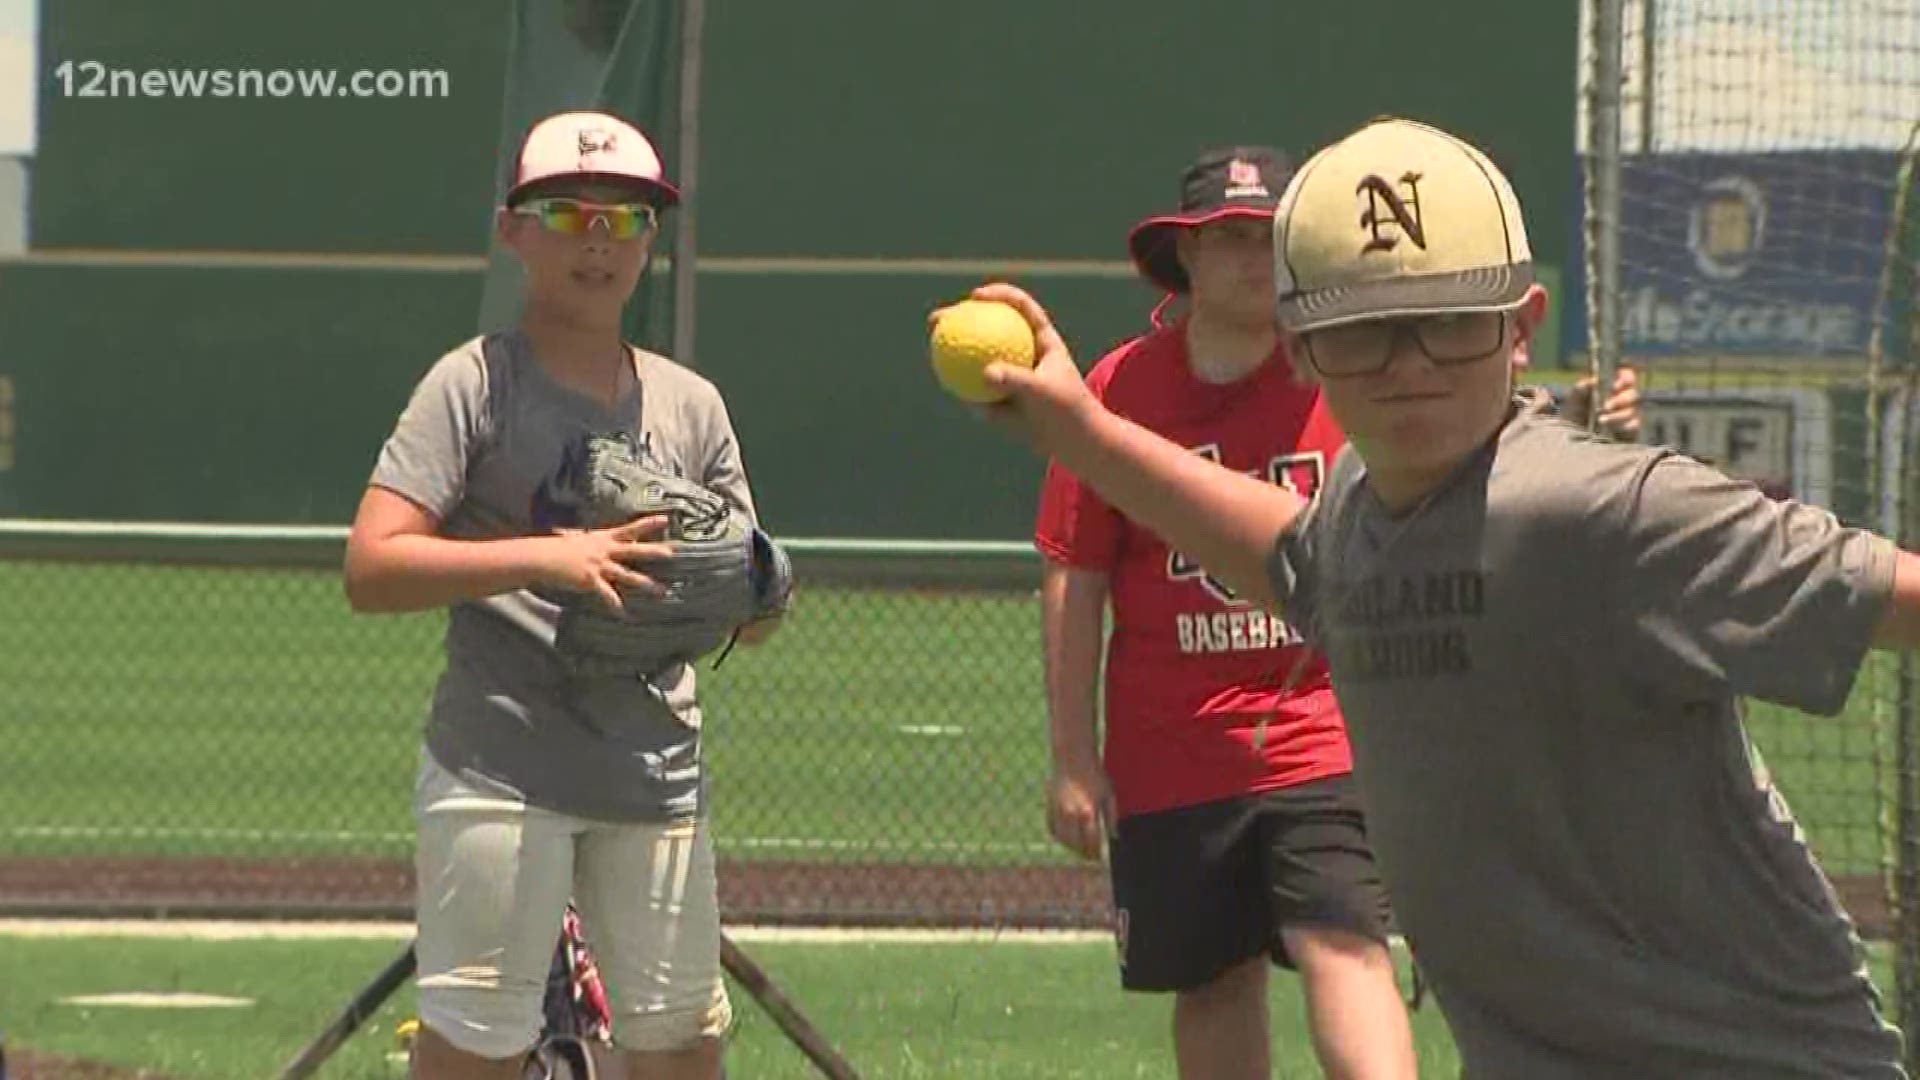 Kids ranging from six years old to incoming 8th graders learned to sharpen their skills